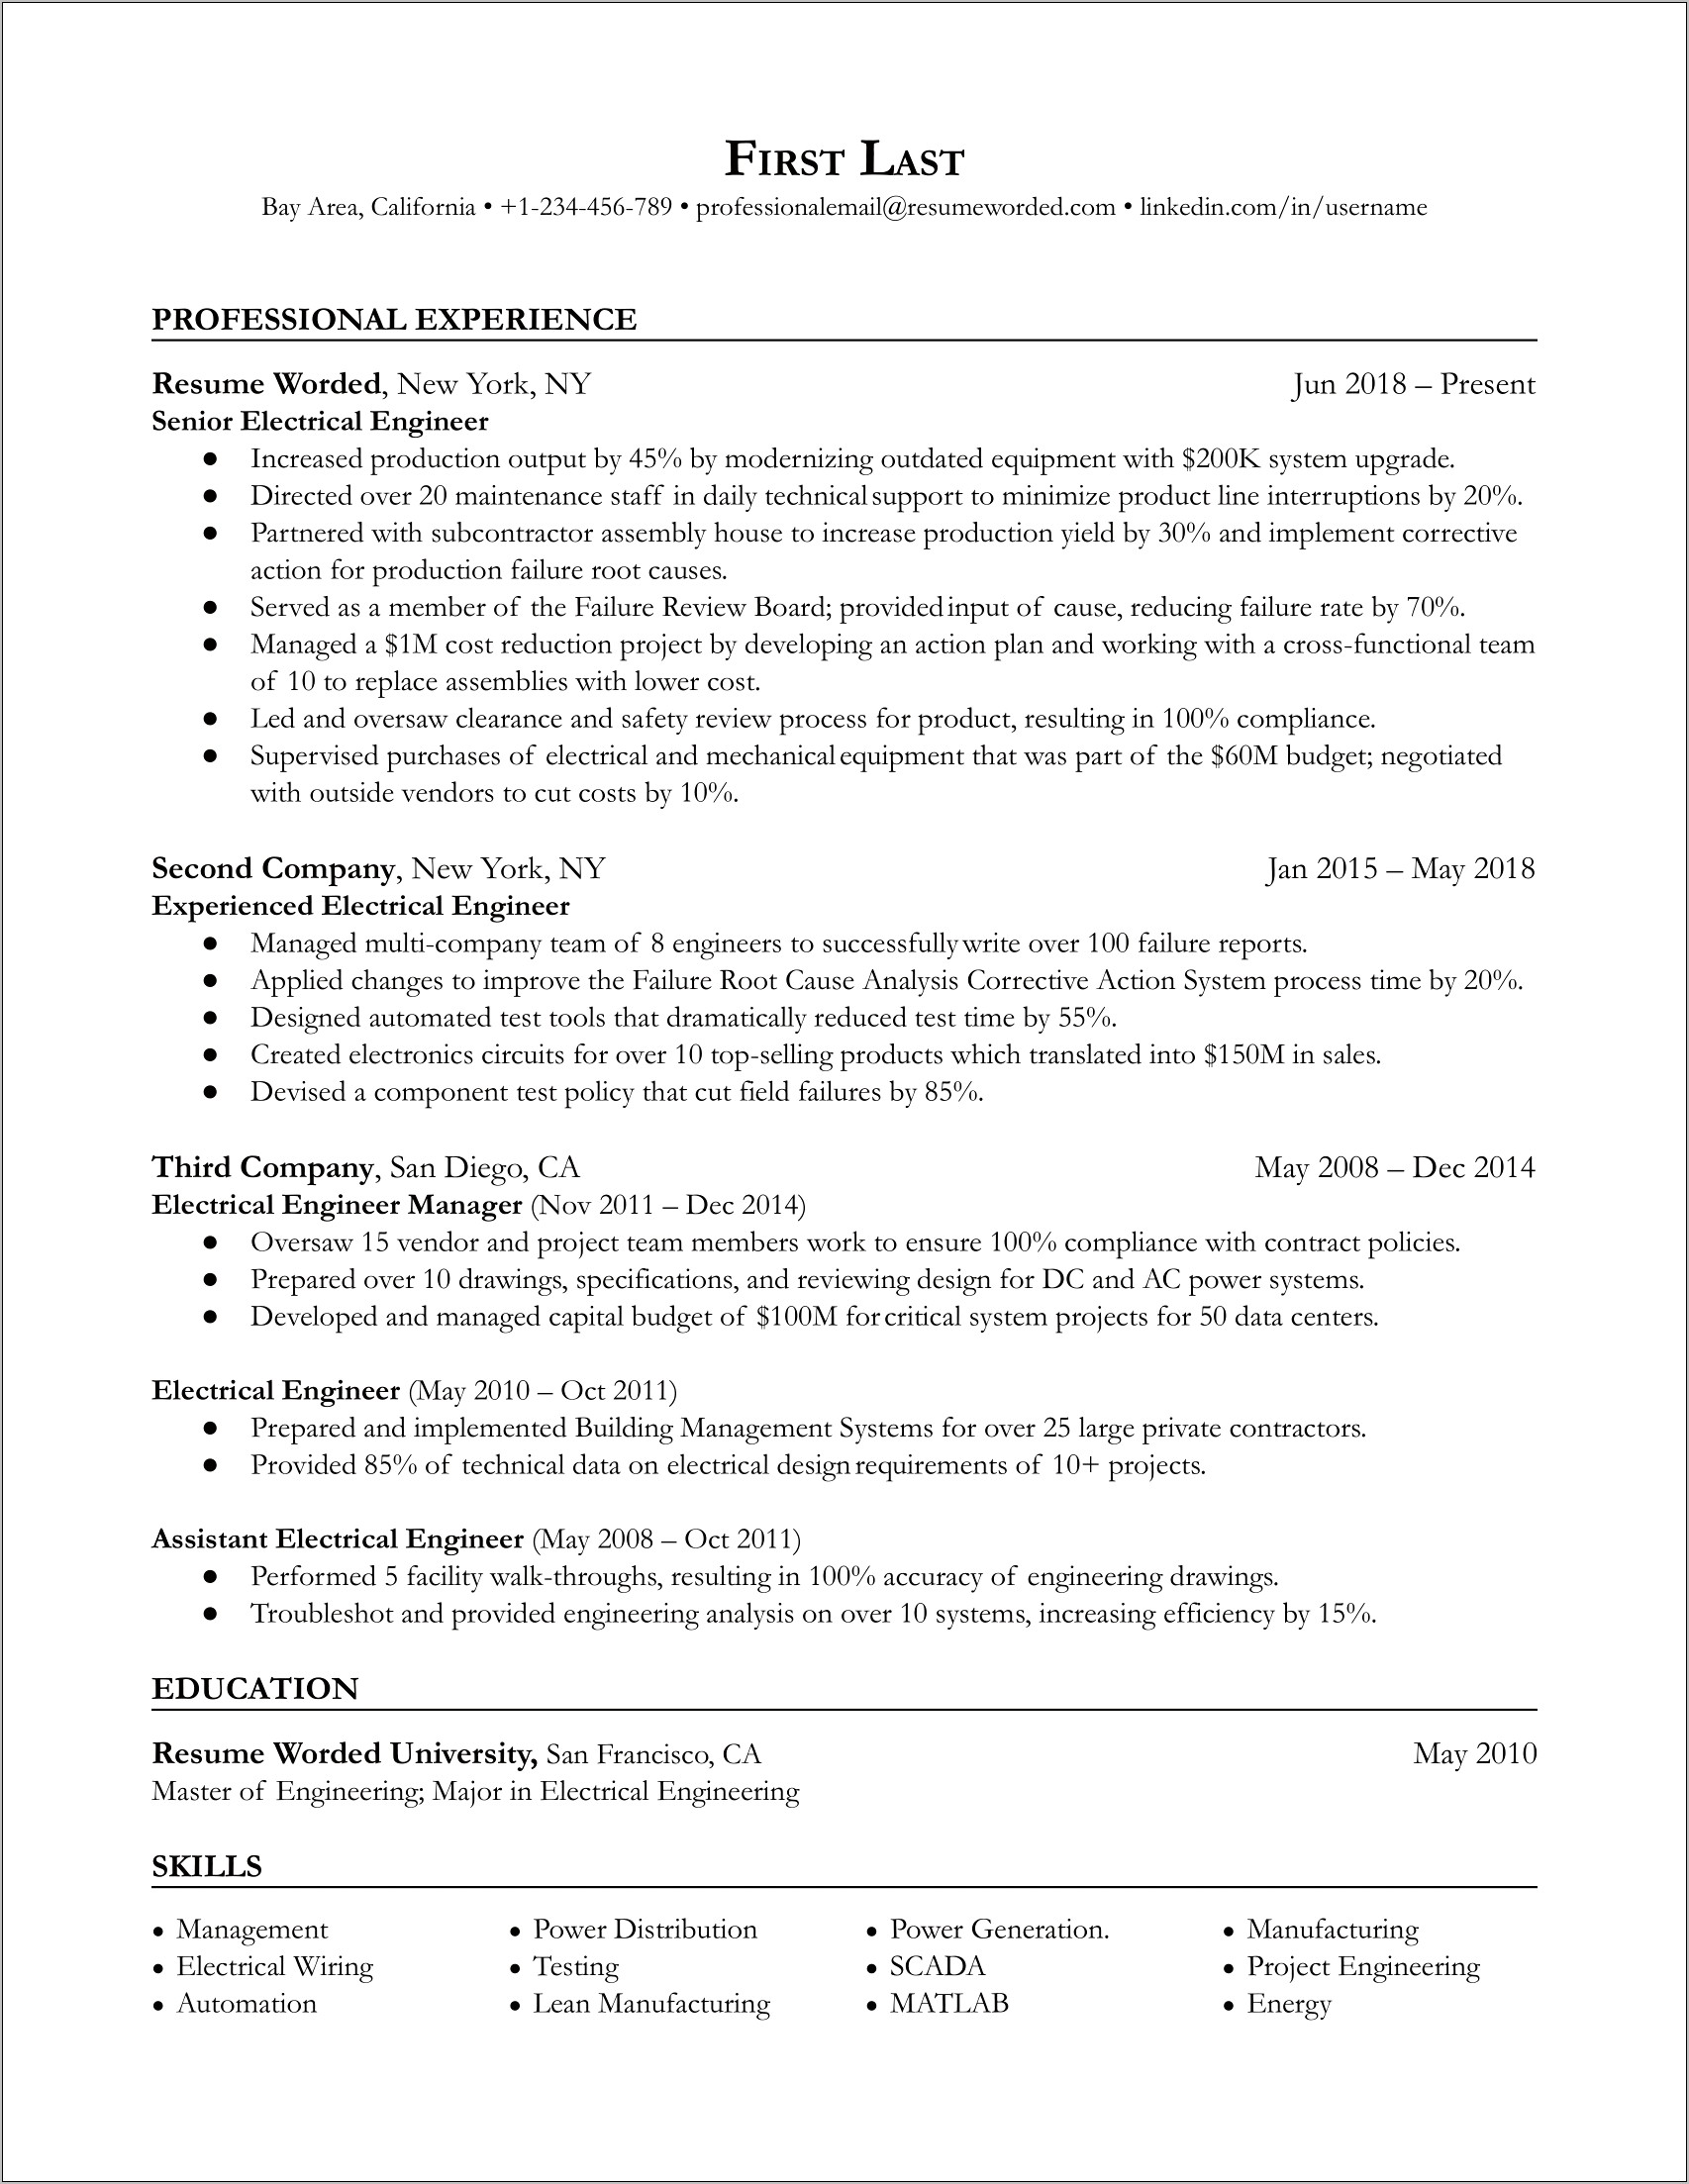 Professional Summary For Electrical Engineer Resume Fresher